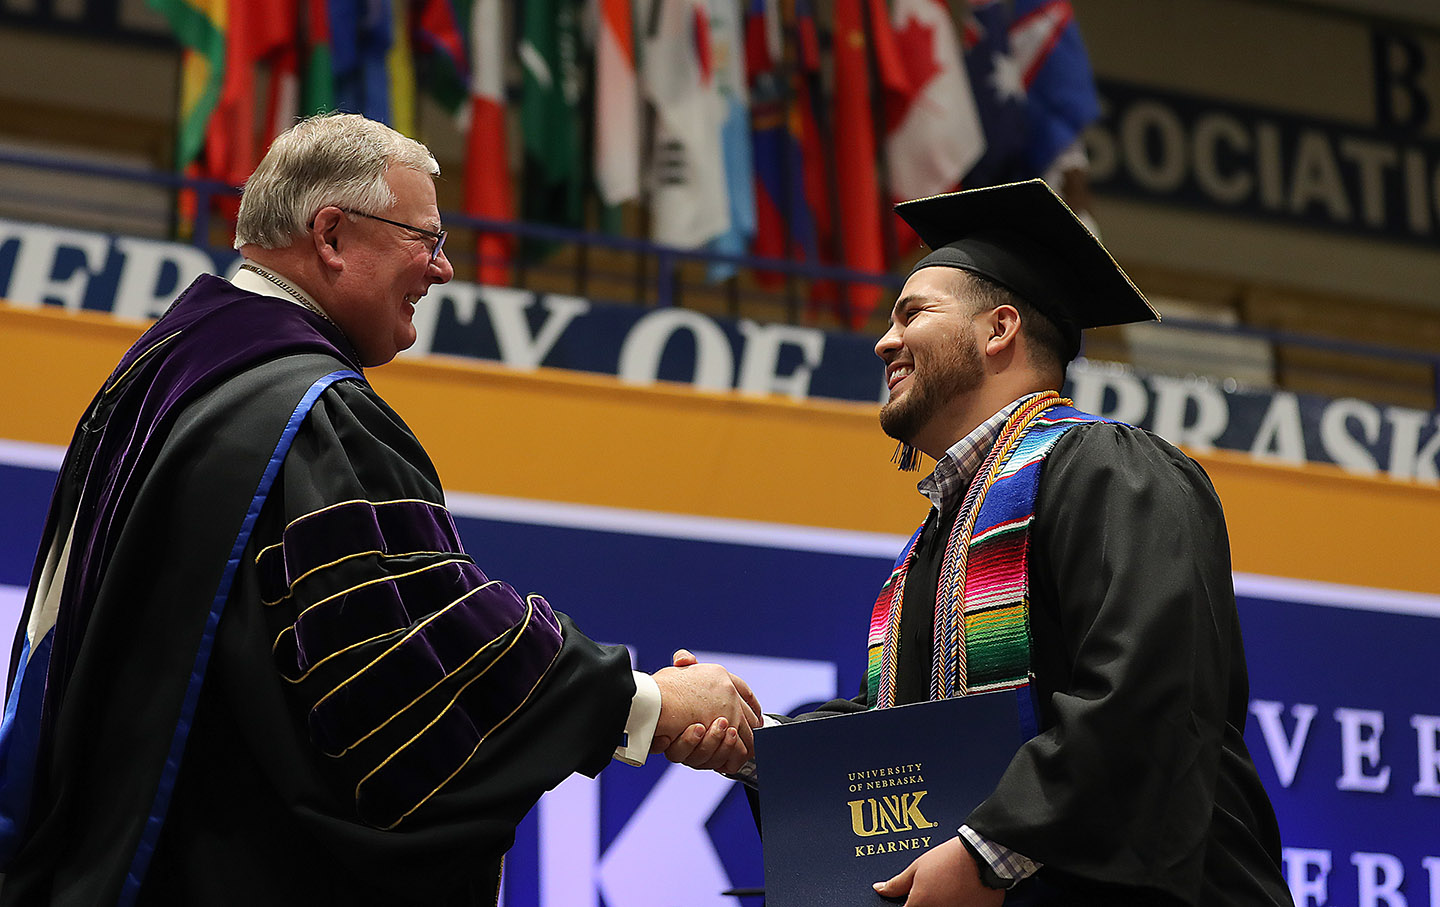 Jose Ceballos, right, is congratulated by UNK Chancellor Doug Kristensen during Friday’s winter commencement ceremony. Ceballos received bachelor’s degrees in modern languages education and English as a second language. (Photos by Erika Pritchard, UNK Communications)